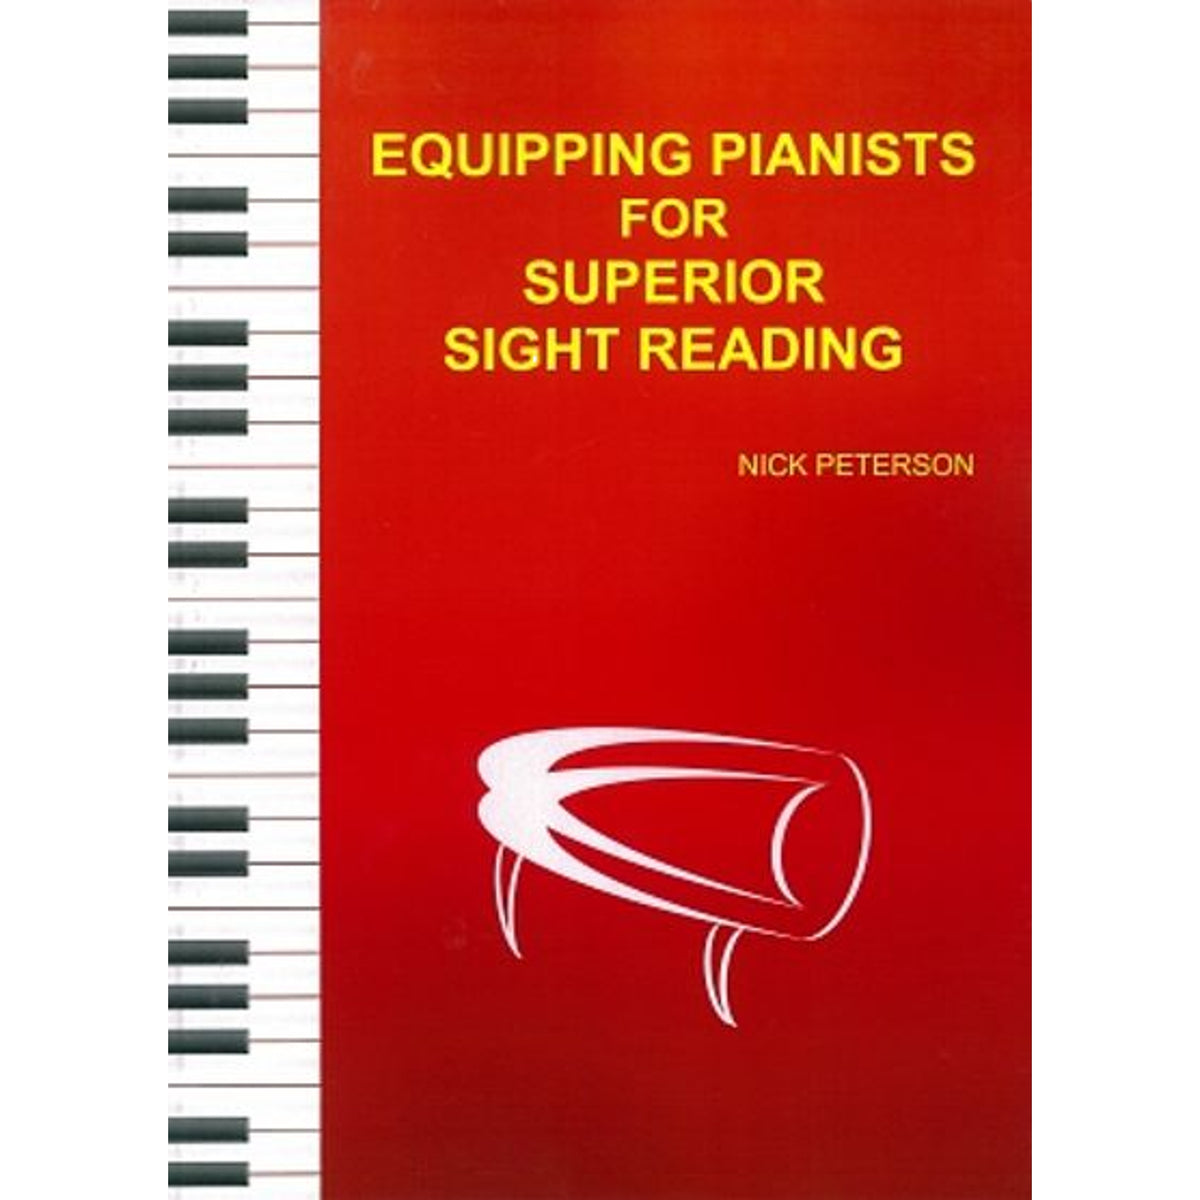 Equiping Pianists for Superior Sight Reading